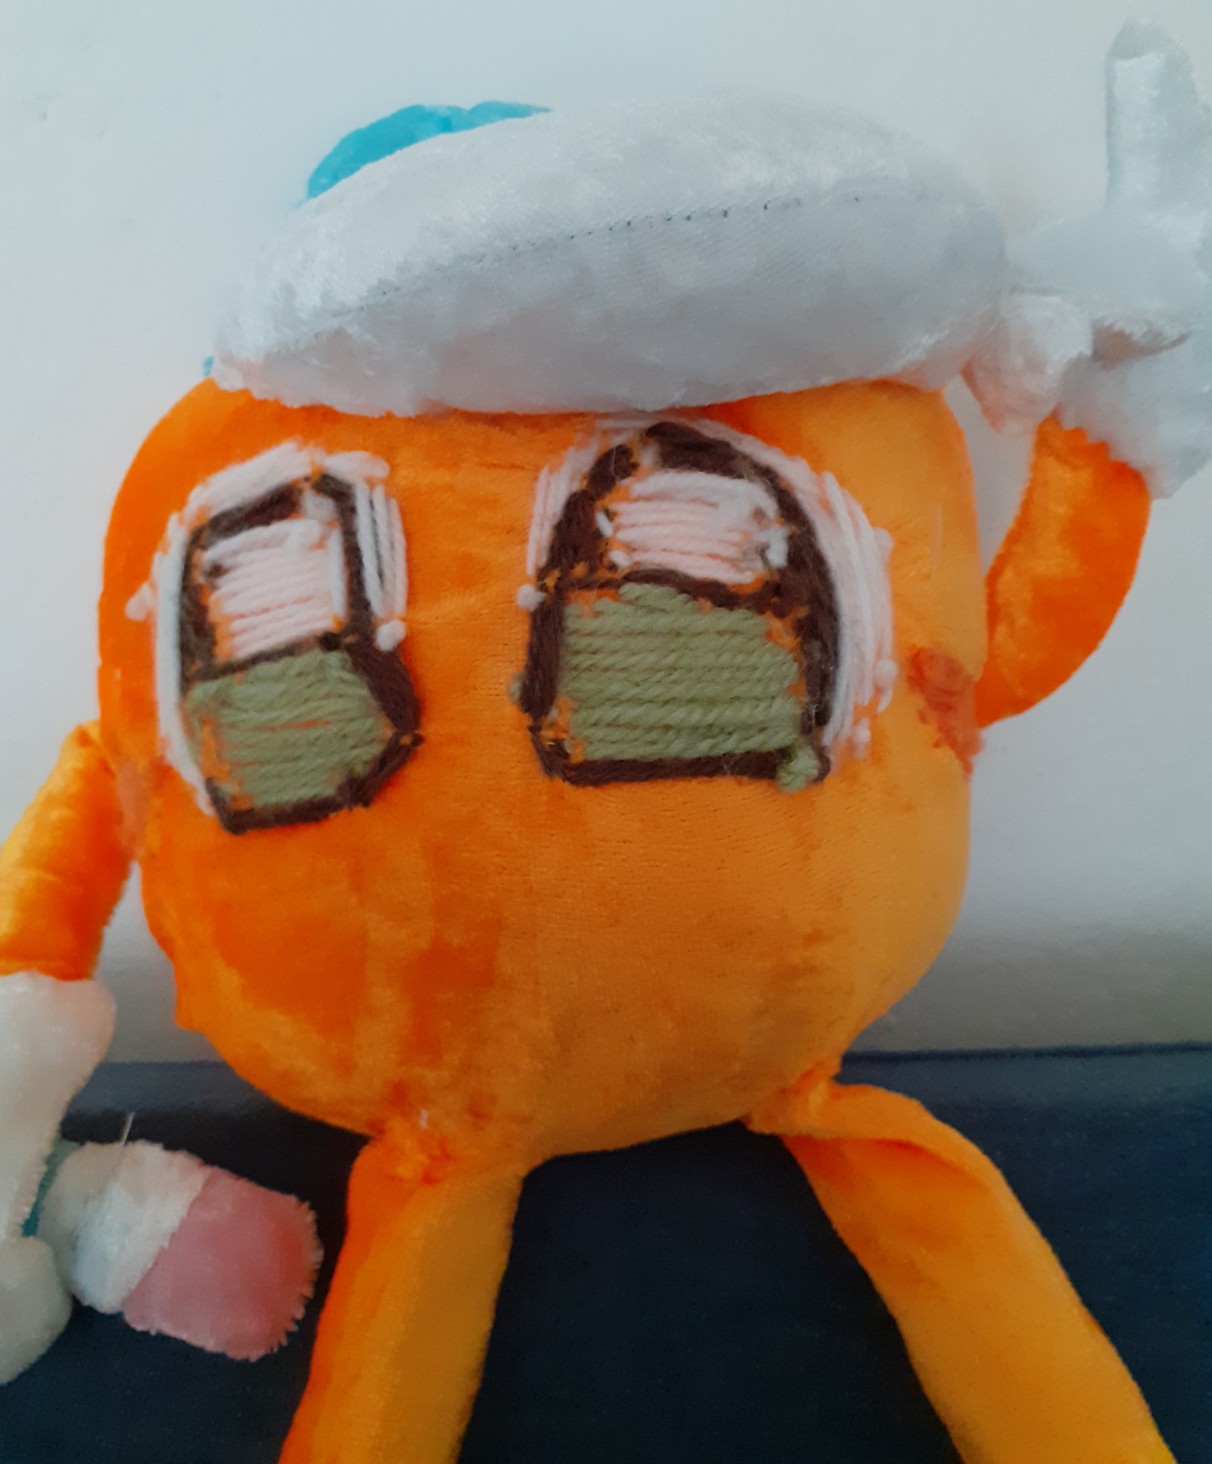 Paint Roller Plushie